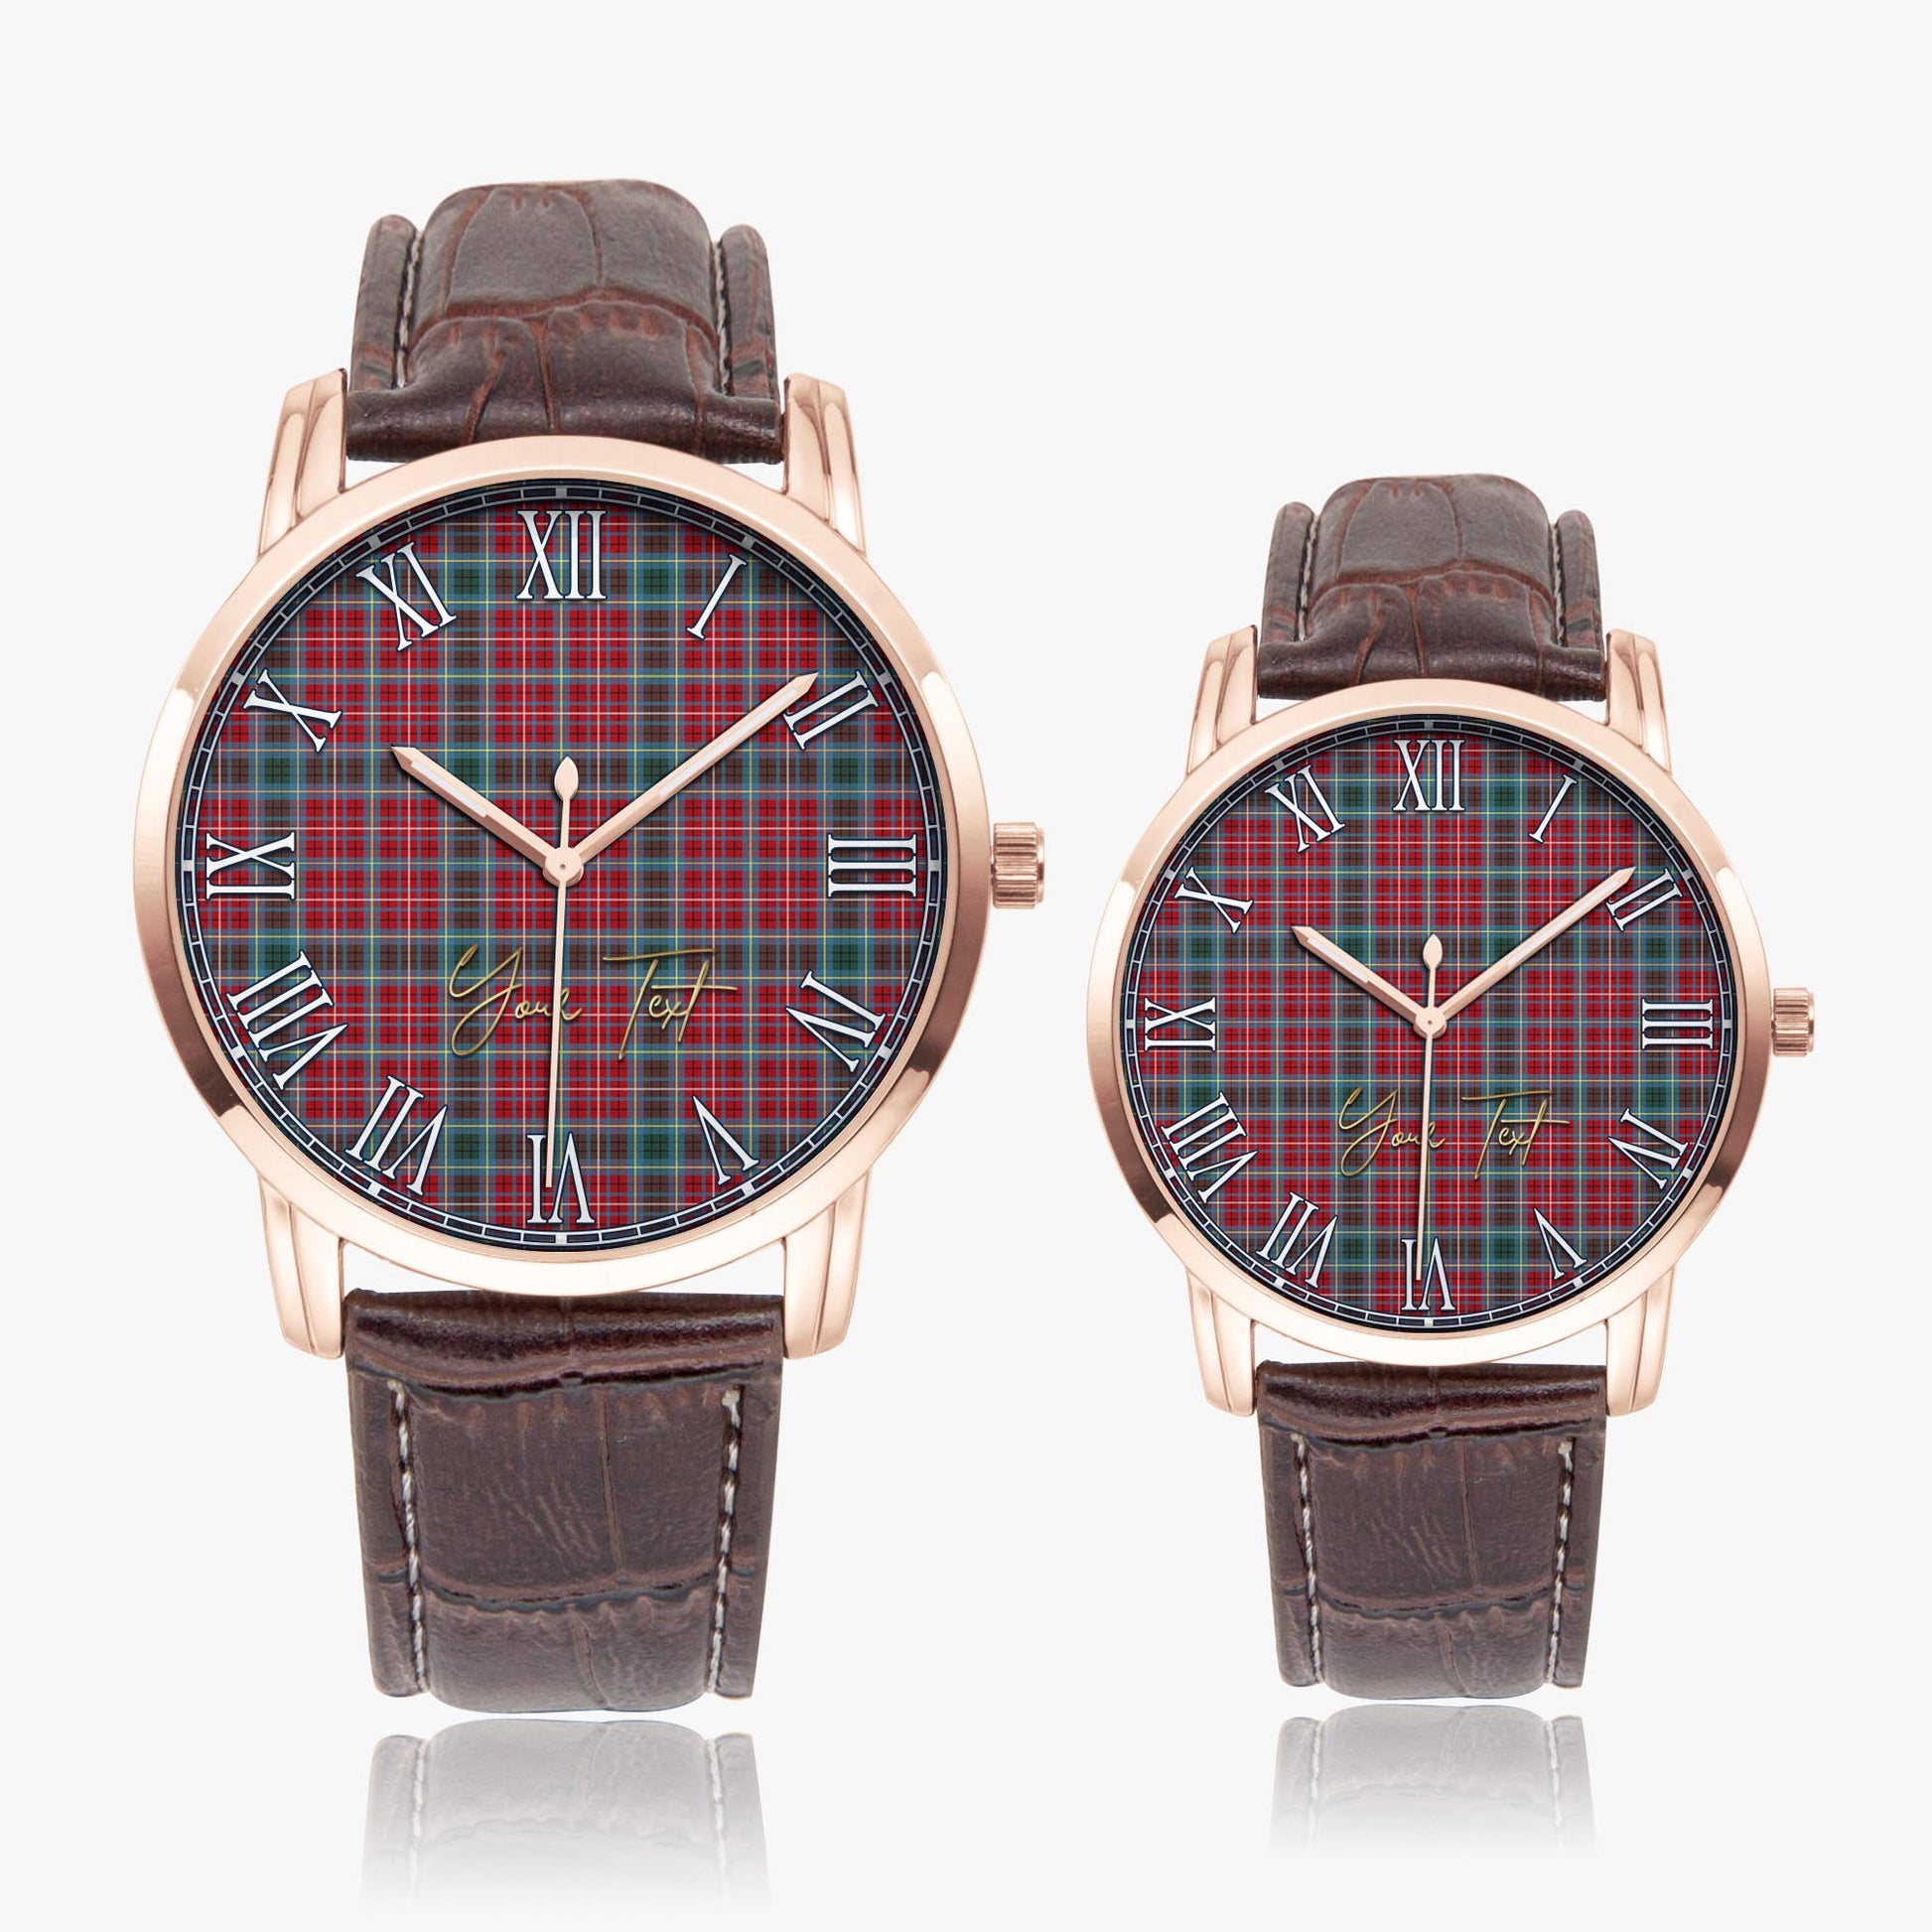 British Columbia Province Canada Tartan Personalized Your Text Leather Trap Quartz Watch Wide Type Rose Gold Case With Brown Leather Strap - Tartanvibesclothing